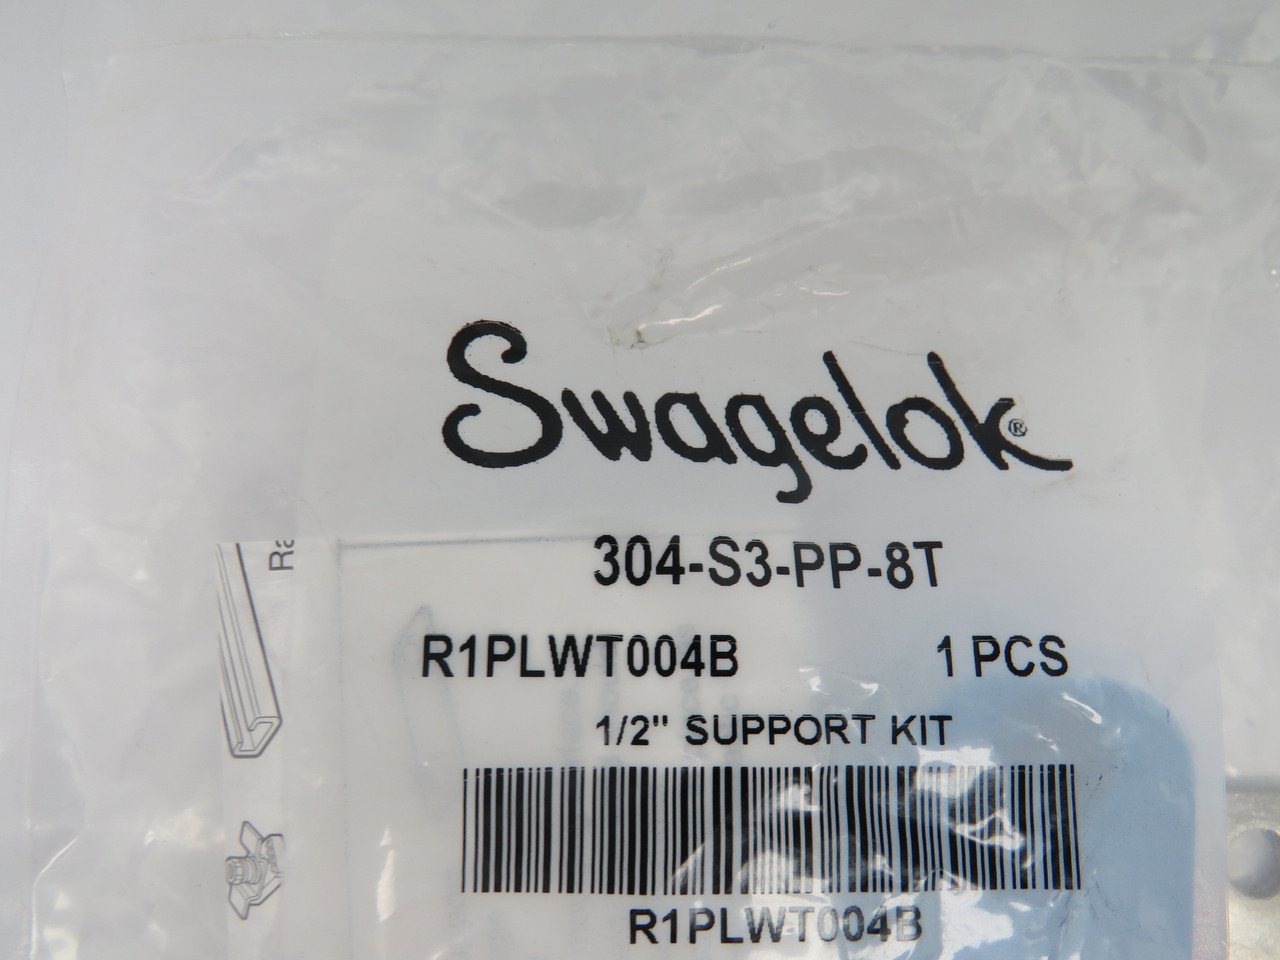 Swagelok 304-S3-PP-8T Bolted Plastic Clamp Tube Support Kit 1/2